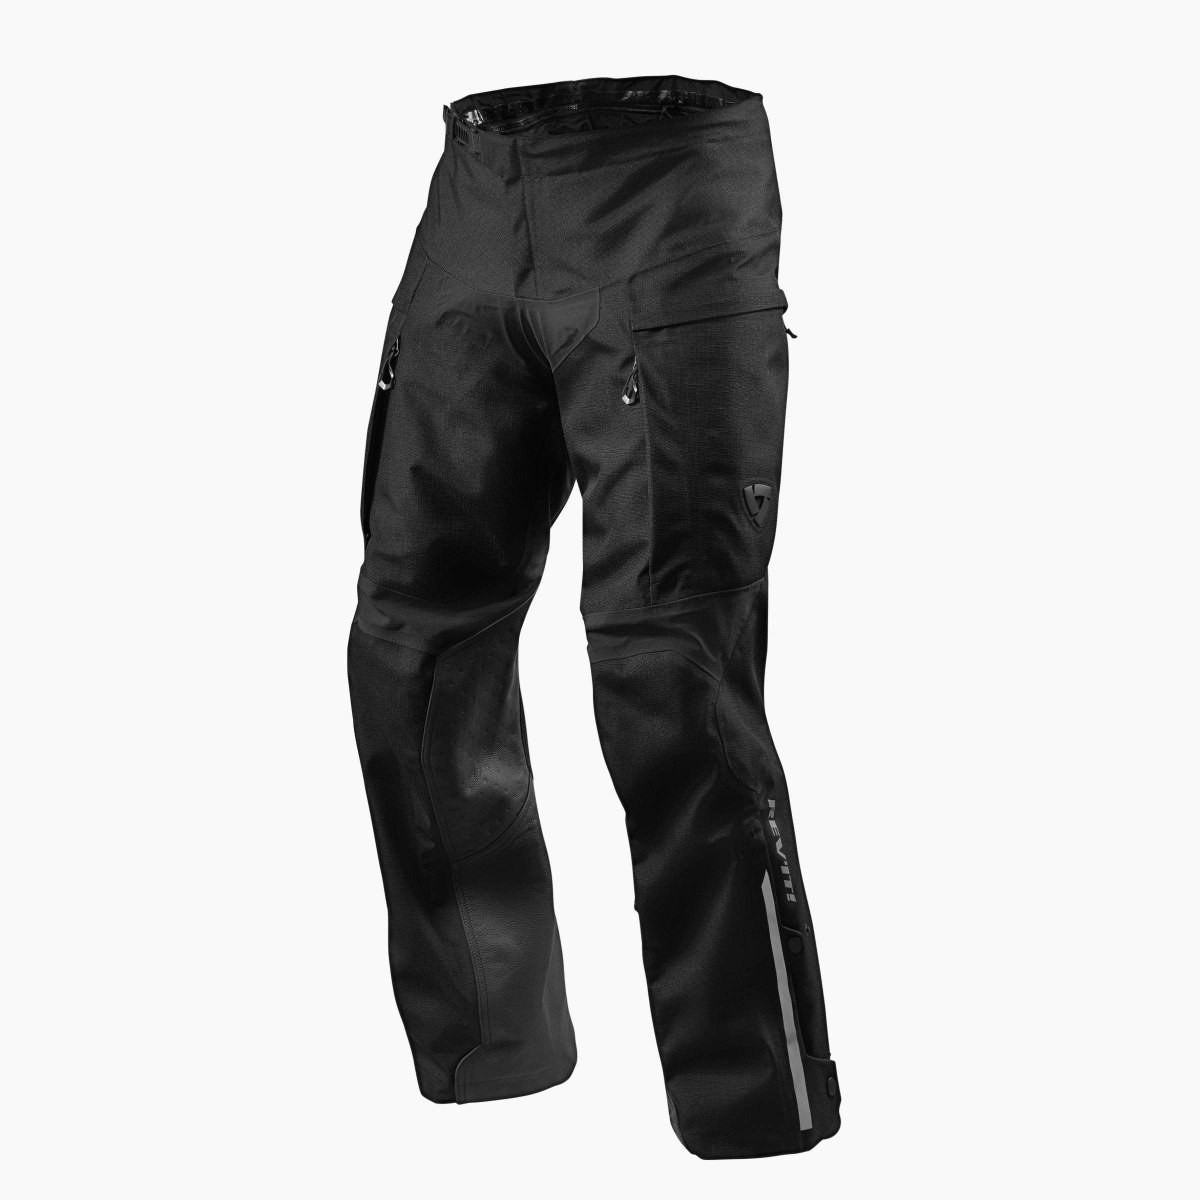 Image of REV'IT! Component H2O Short Black Motorcycle Pants Size M ID 8700001317726